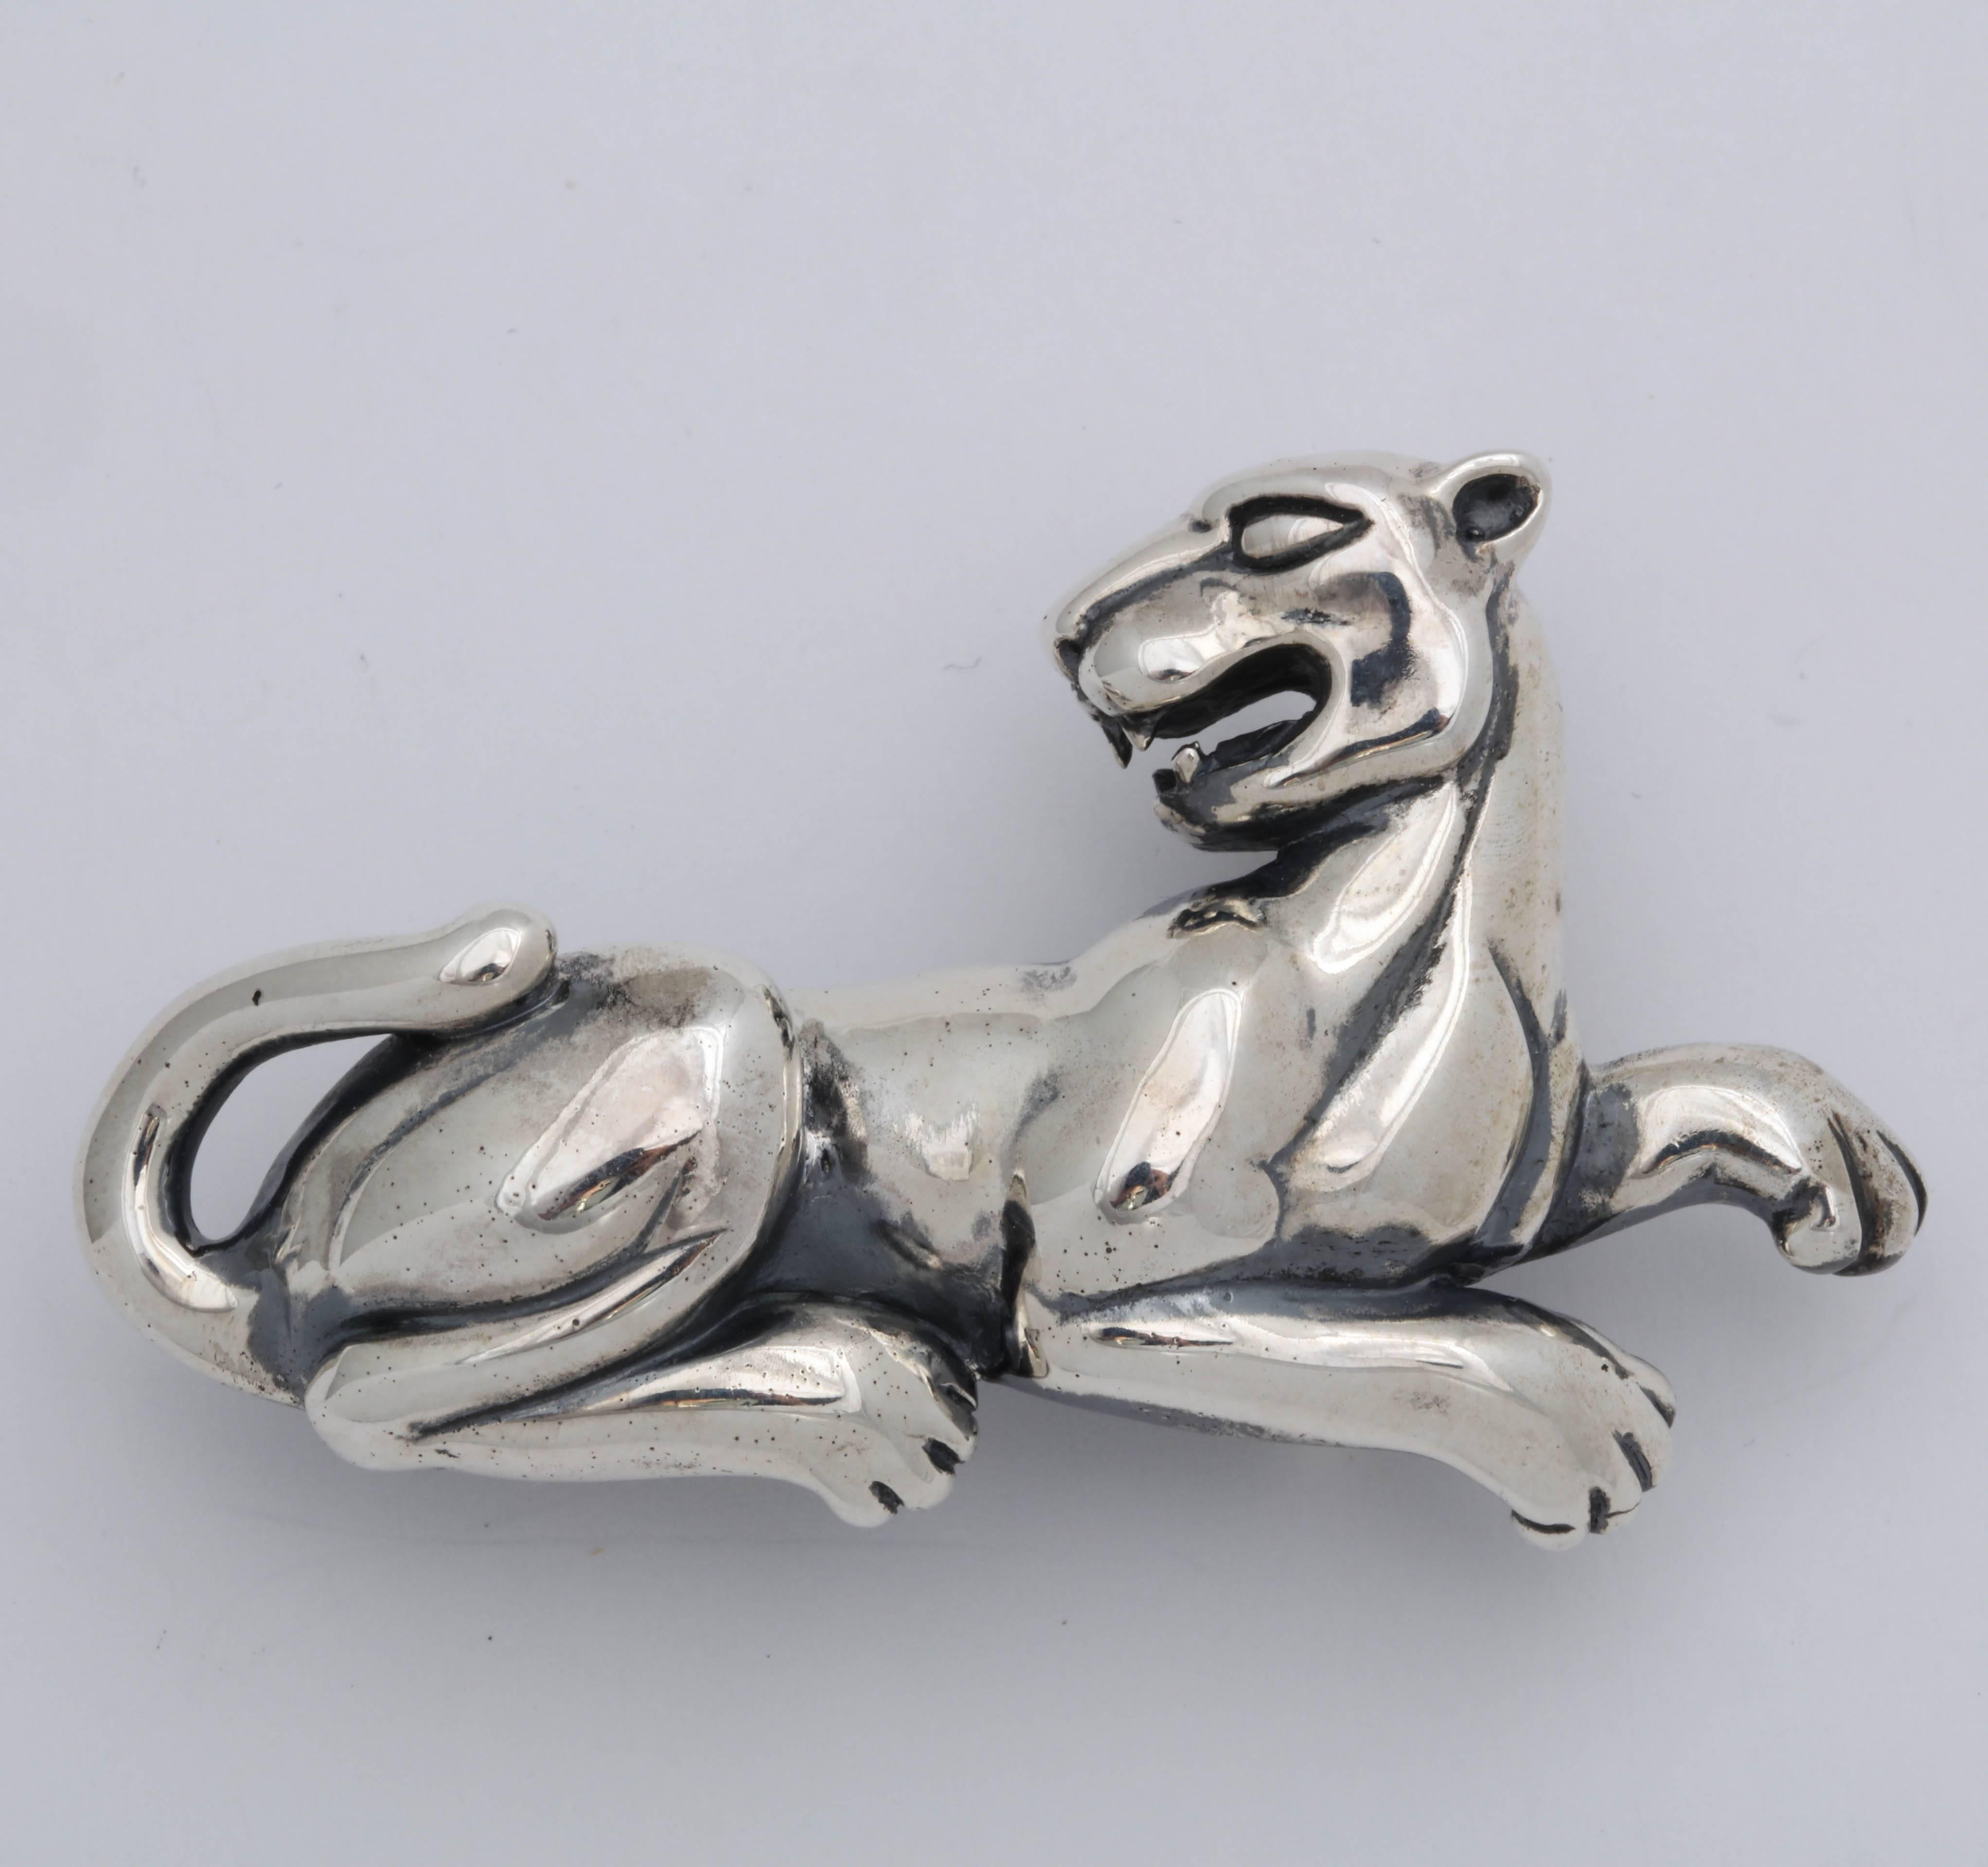 The stunning panther belt buckle fits a 1 in. to 1 1/4 in. wide belt. It has a hook and ball closure. The silver is polished and oxidized to give it depth and a vintage look. The panther is 2 1/4 in long and 1 3/5 in. high.